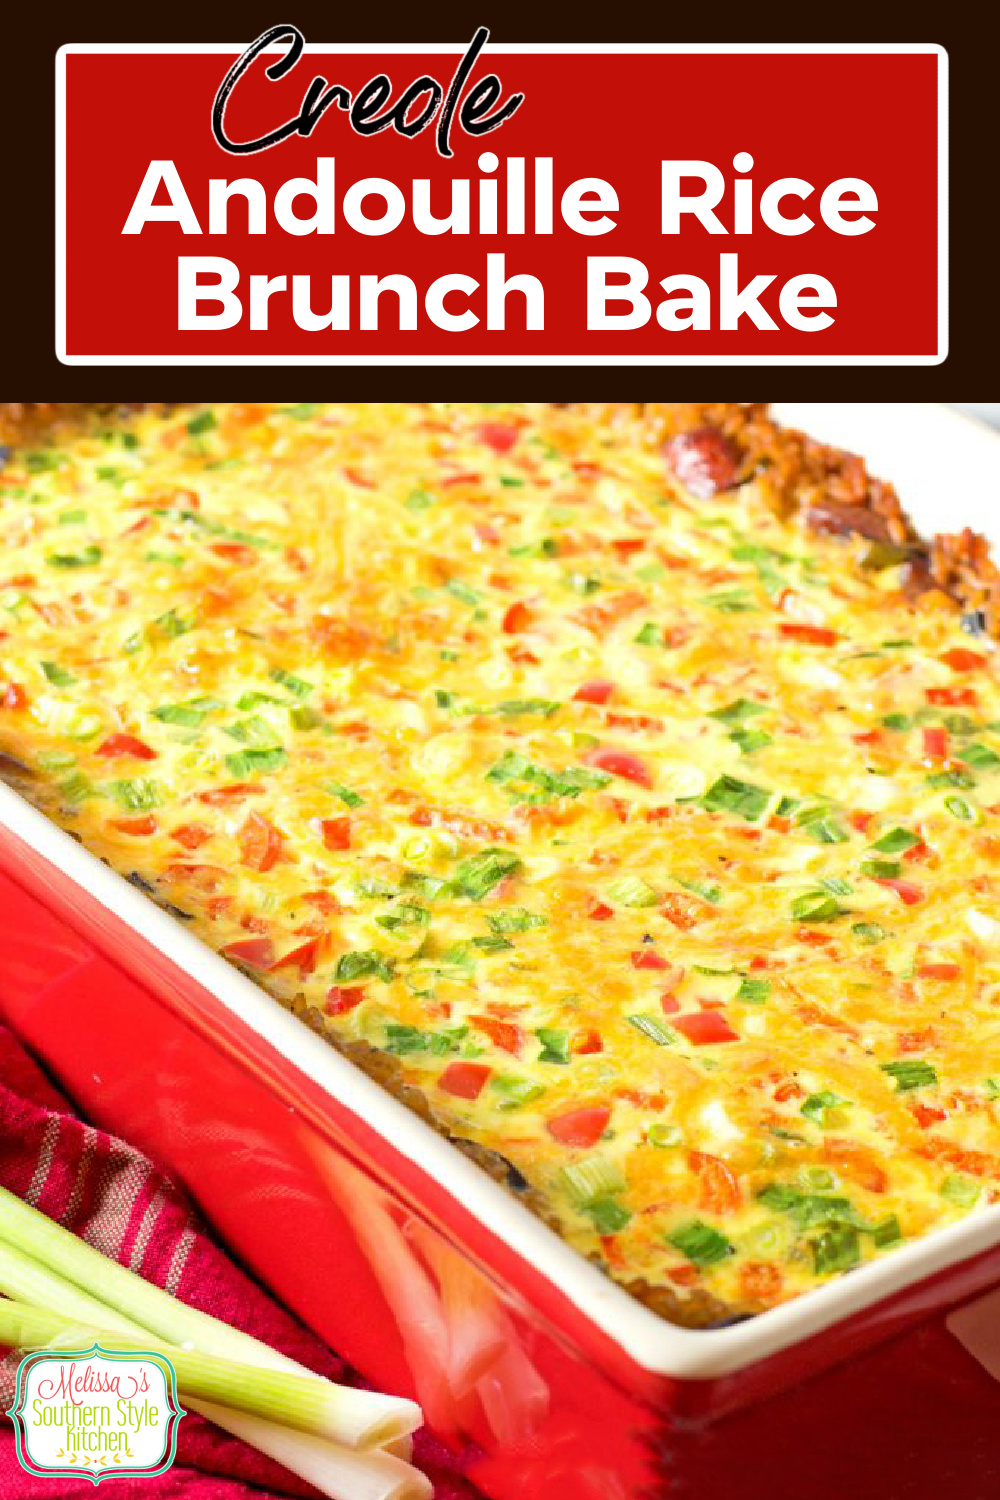 This New Orleans inspired Creole Andouille Rice Brunch Bake features andouille seasoned rice in place of pastry for the crust making it an irresistible way to elevate brunch. #andouillerice #brunch #brunchbake #creolebrunchbake #eggs #eggcasseroles #glutenfree #ricecasserole #brunchcasseroles via @melissasssk